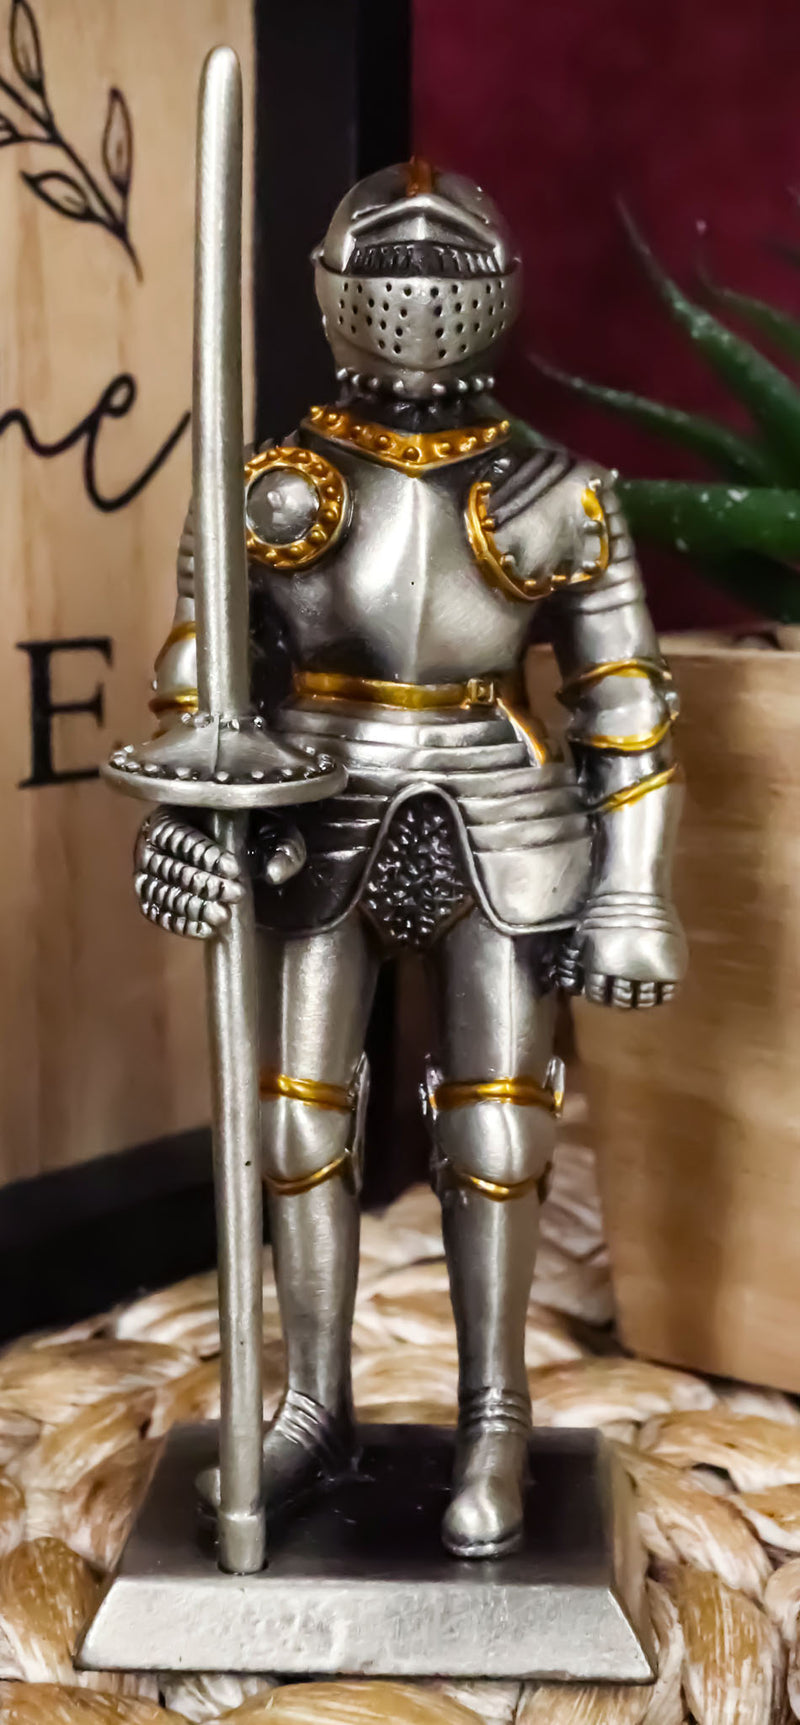 Ebros Pewter English Knight Statue 4" H Medieval Suit Of Armor Knight With Javelin Pole-arm Pewter Figurine Collectible